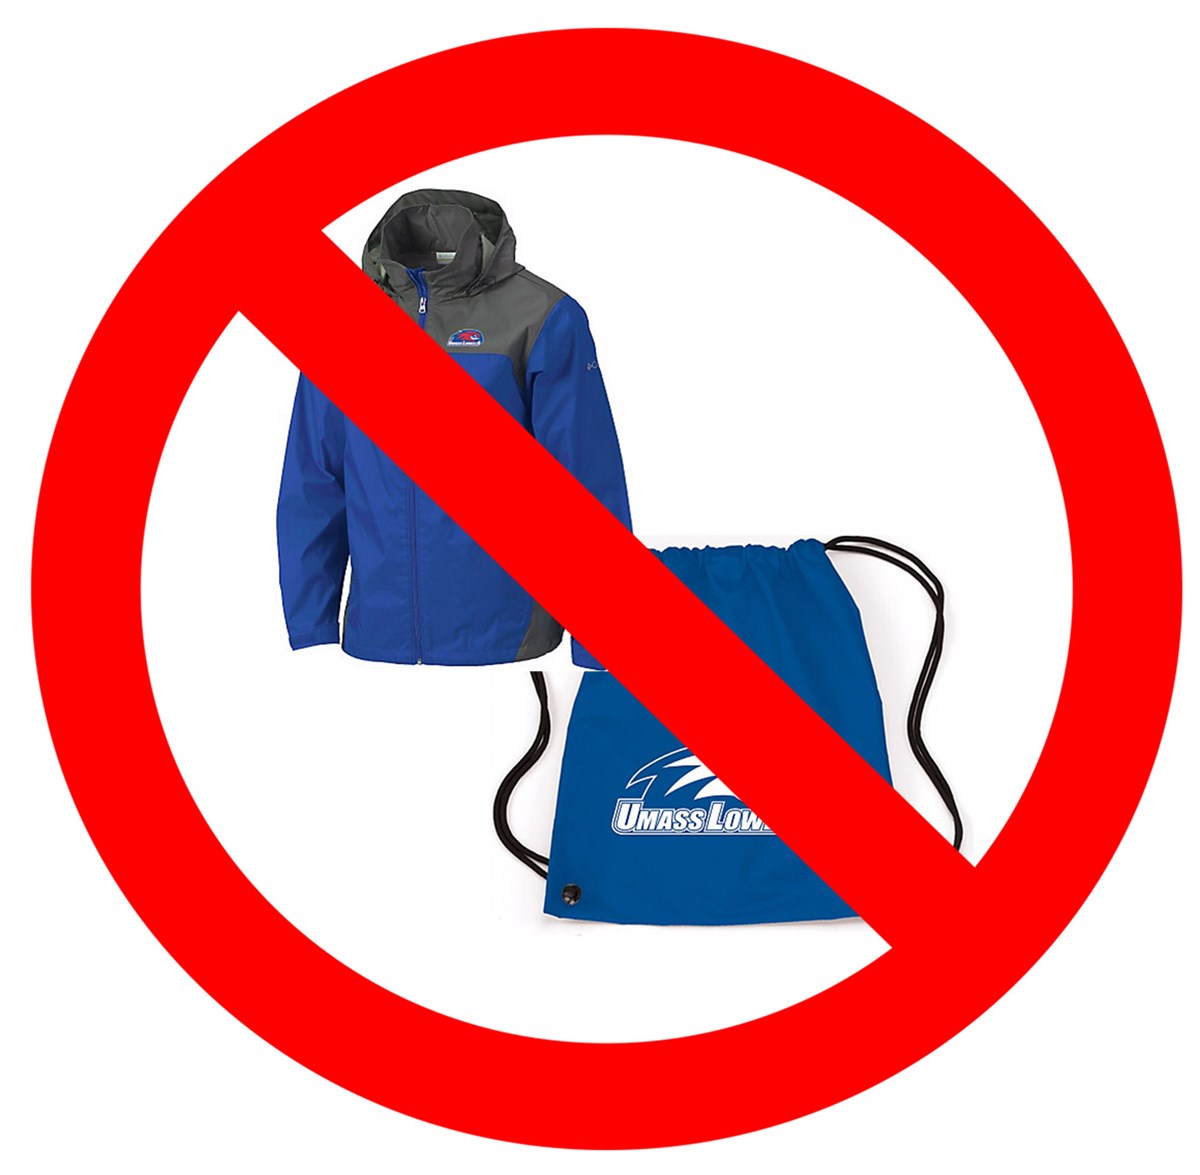 No sign over UMass Lowell jacket and bag. At the UMass Lowell Testing Centers: Leave your jacket and bags in the office. They cannot be taken into the testing areas.